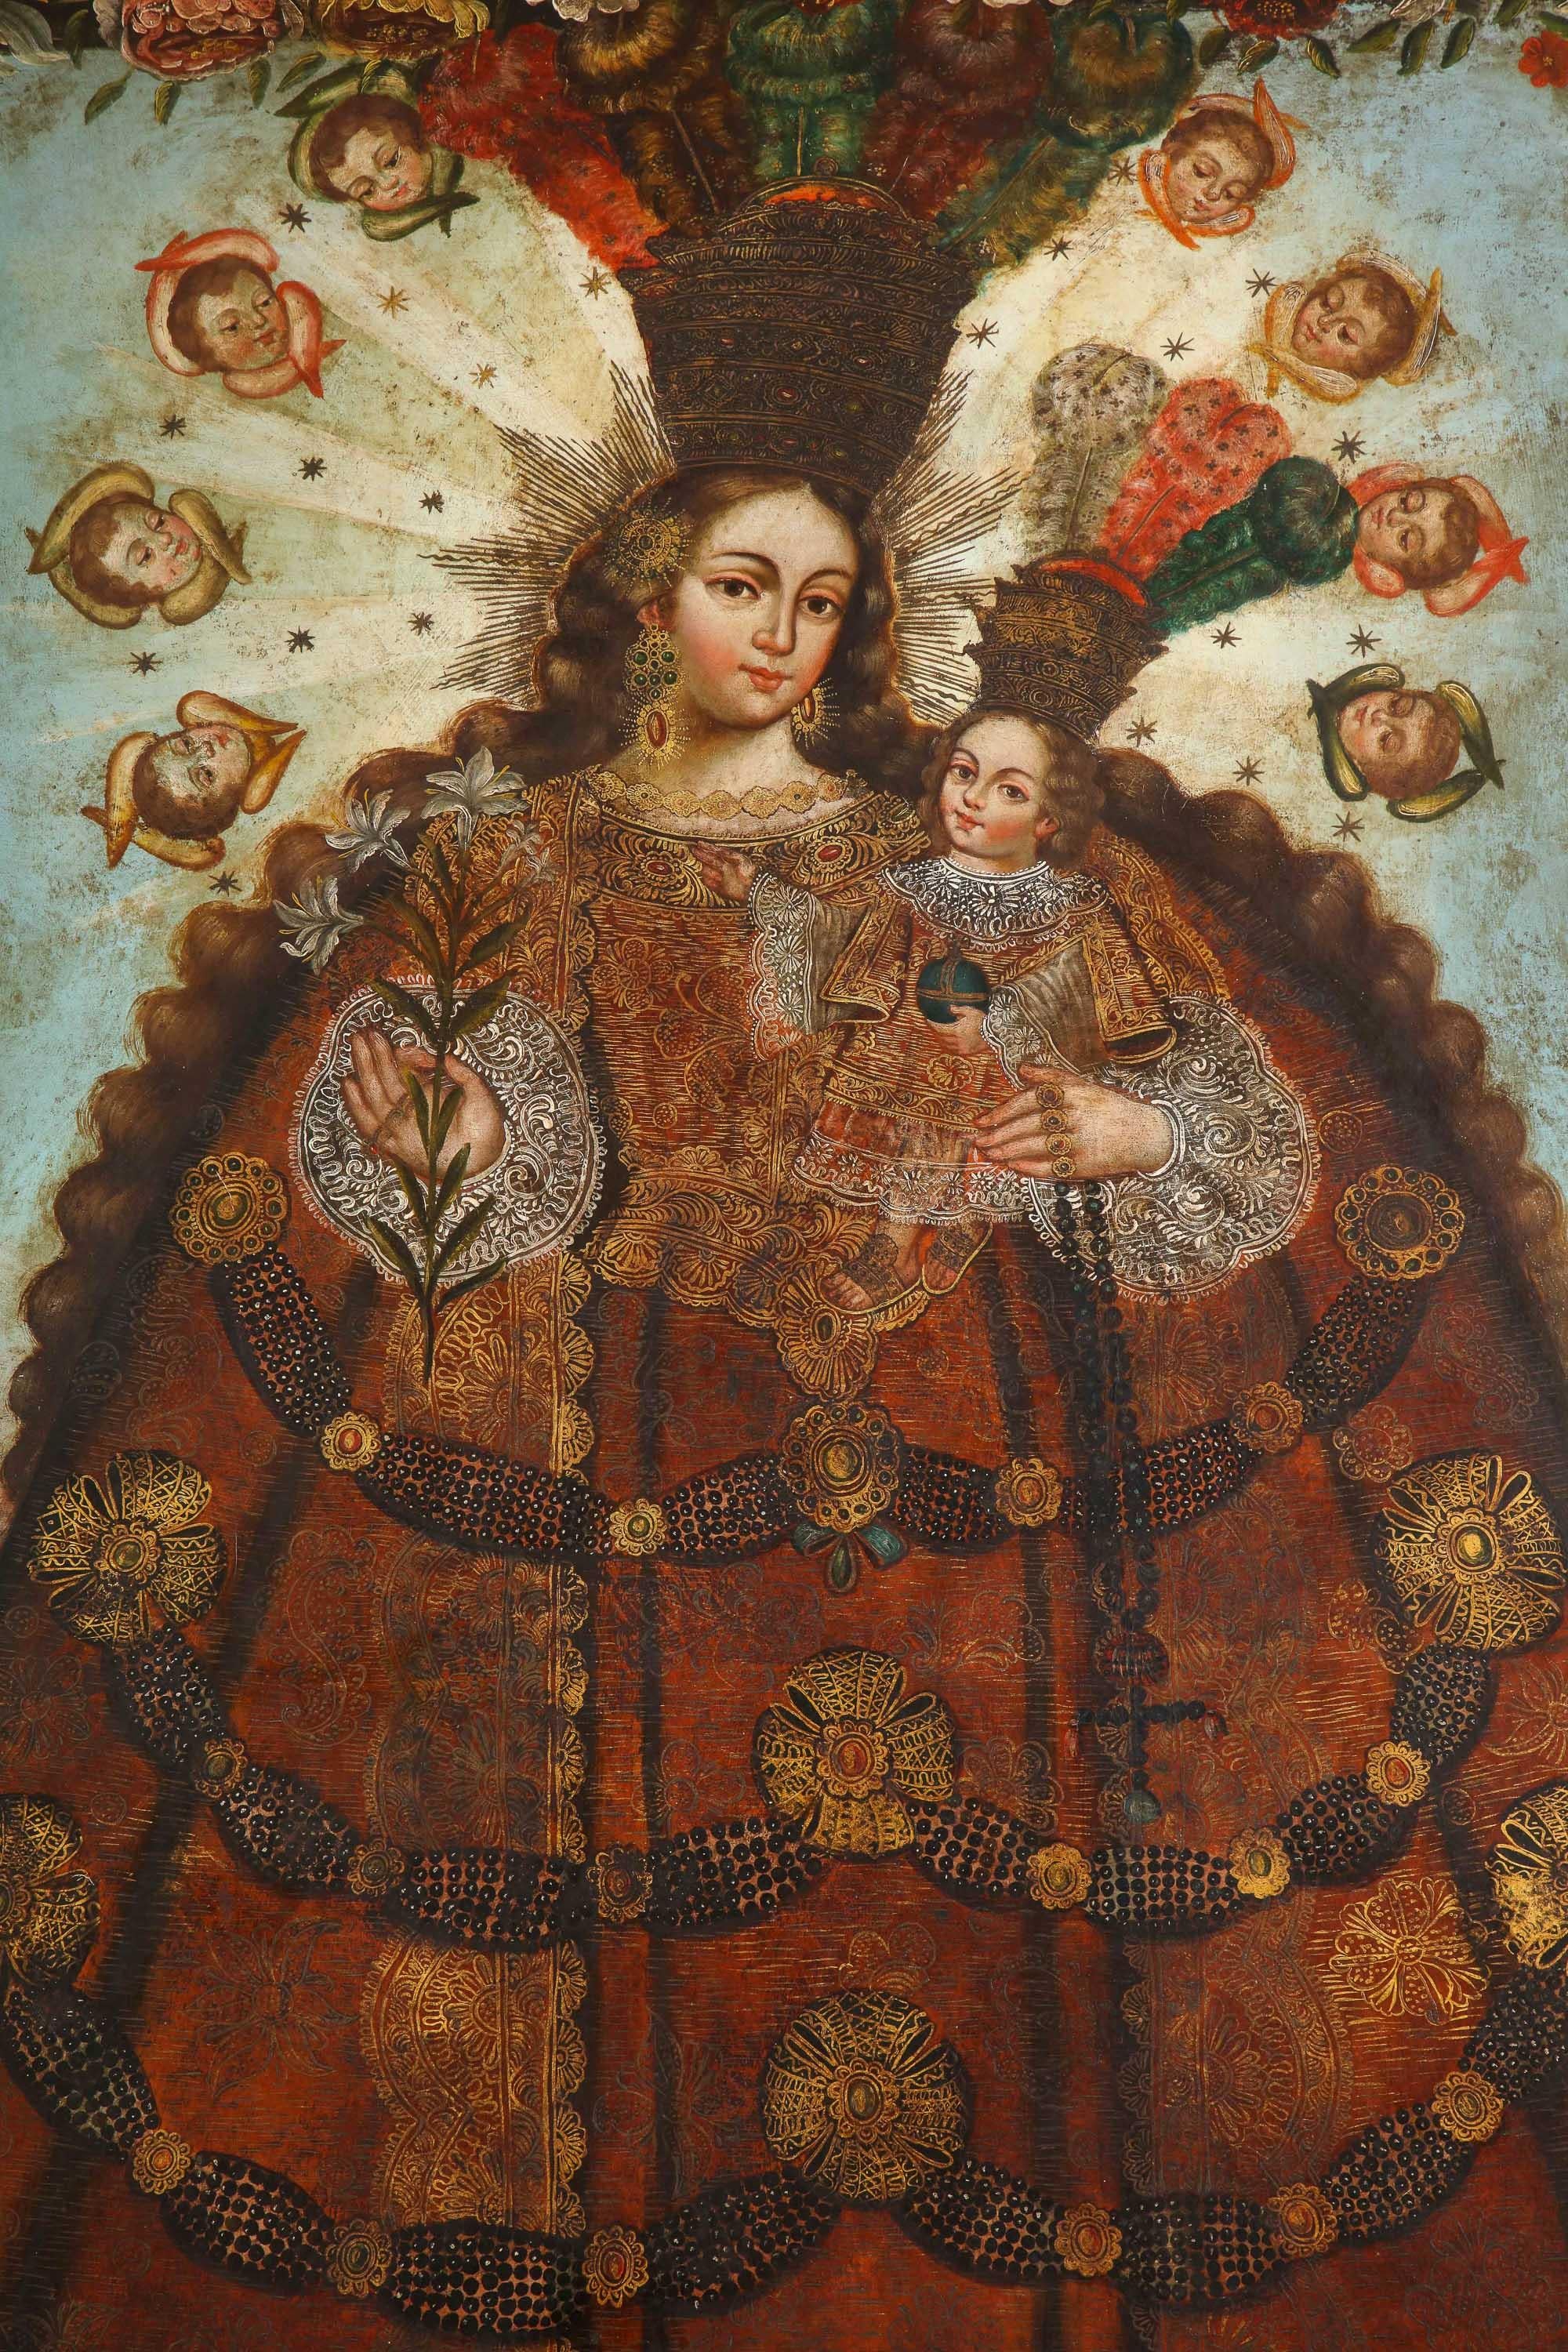 Virgin of Pomata, also referred to as Pachamama
Cuzco, Peru

Exceptional 18th Century Cuzco school depiction of the Virgin Mary and Christ child, both wearing feathered headdresses and with angels surrounding her halo rays, he holding an orb, she